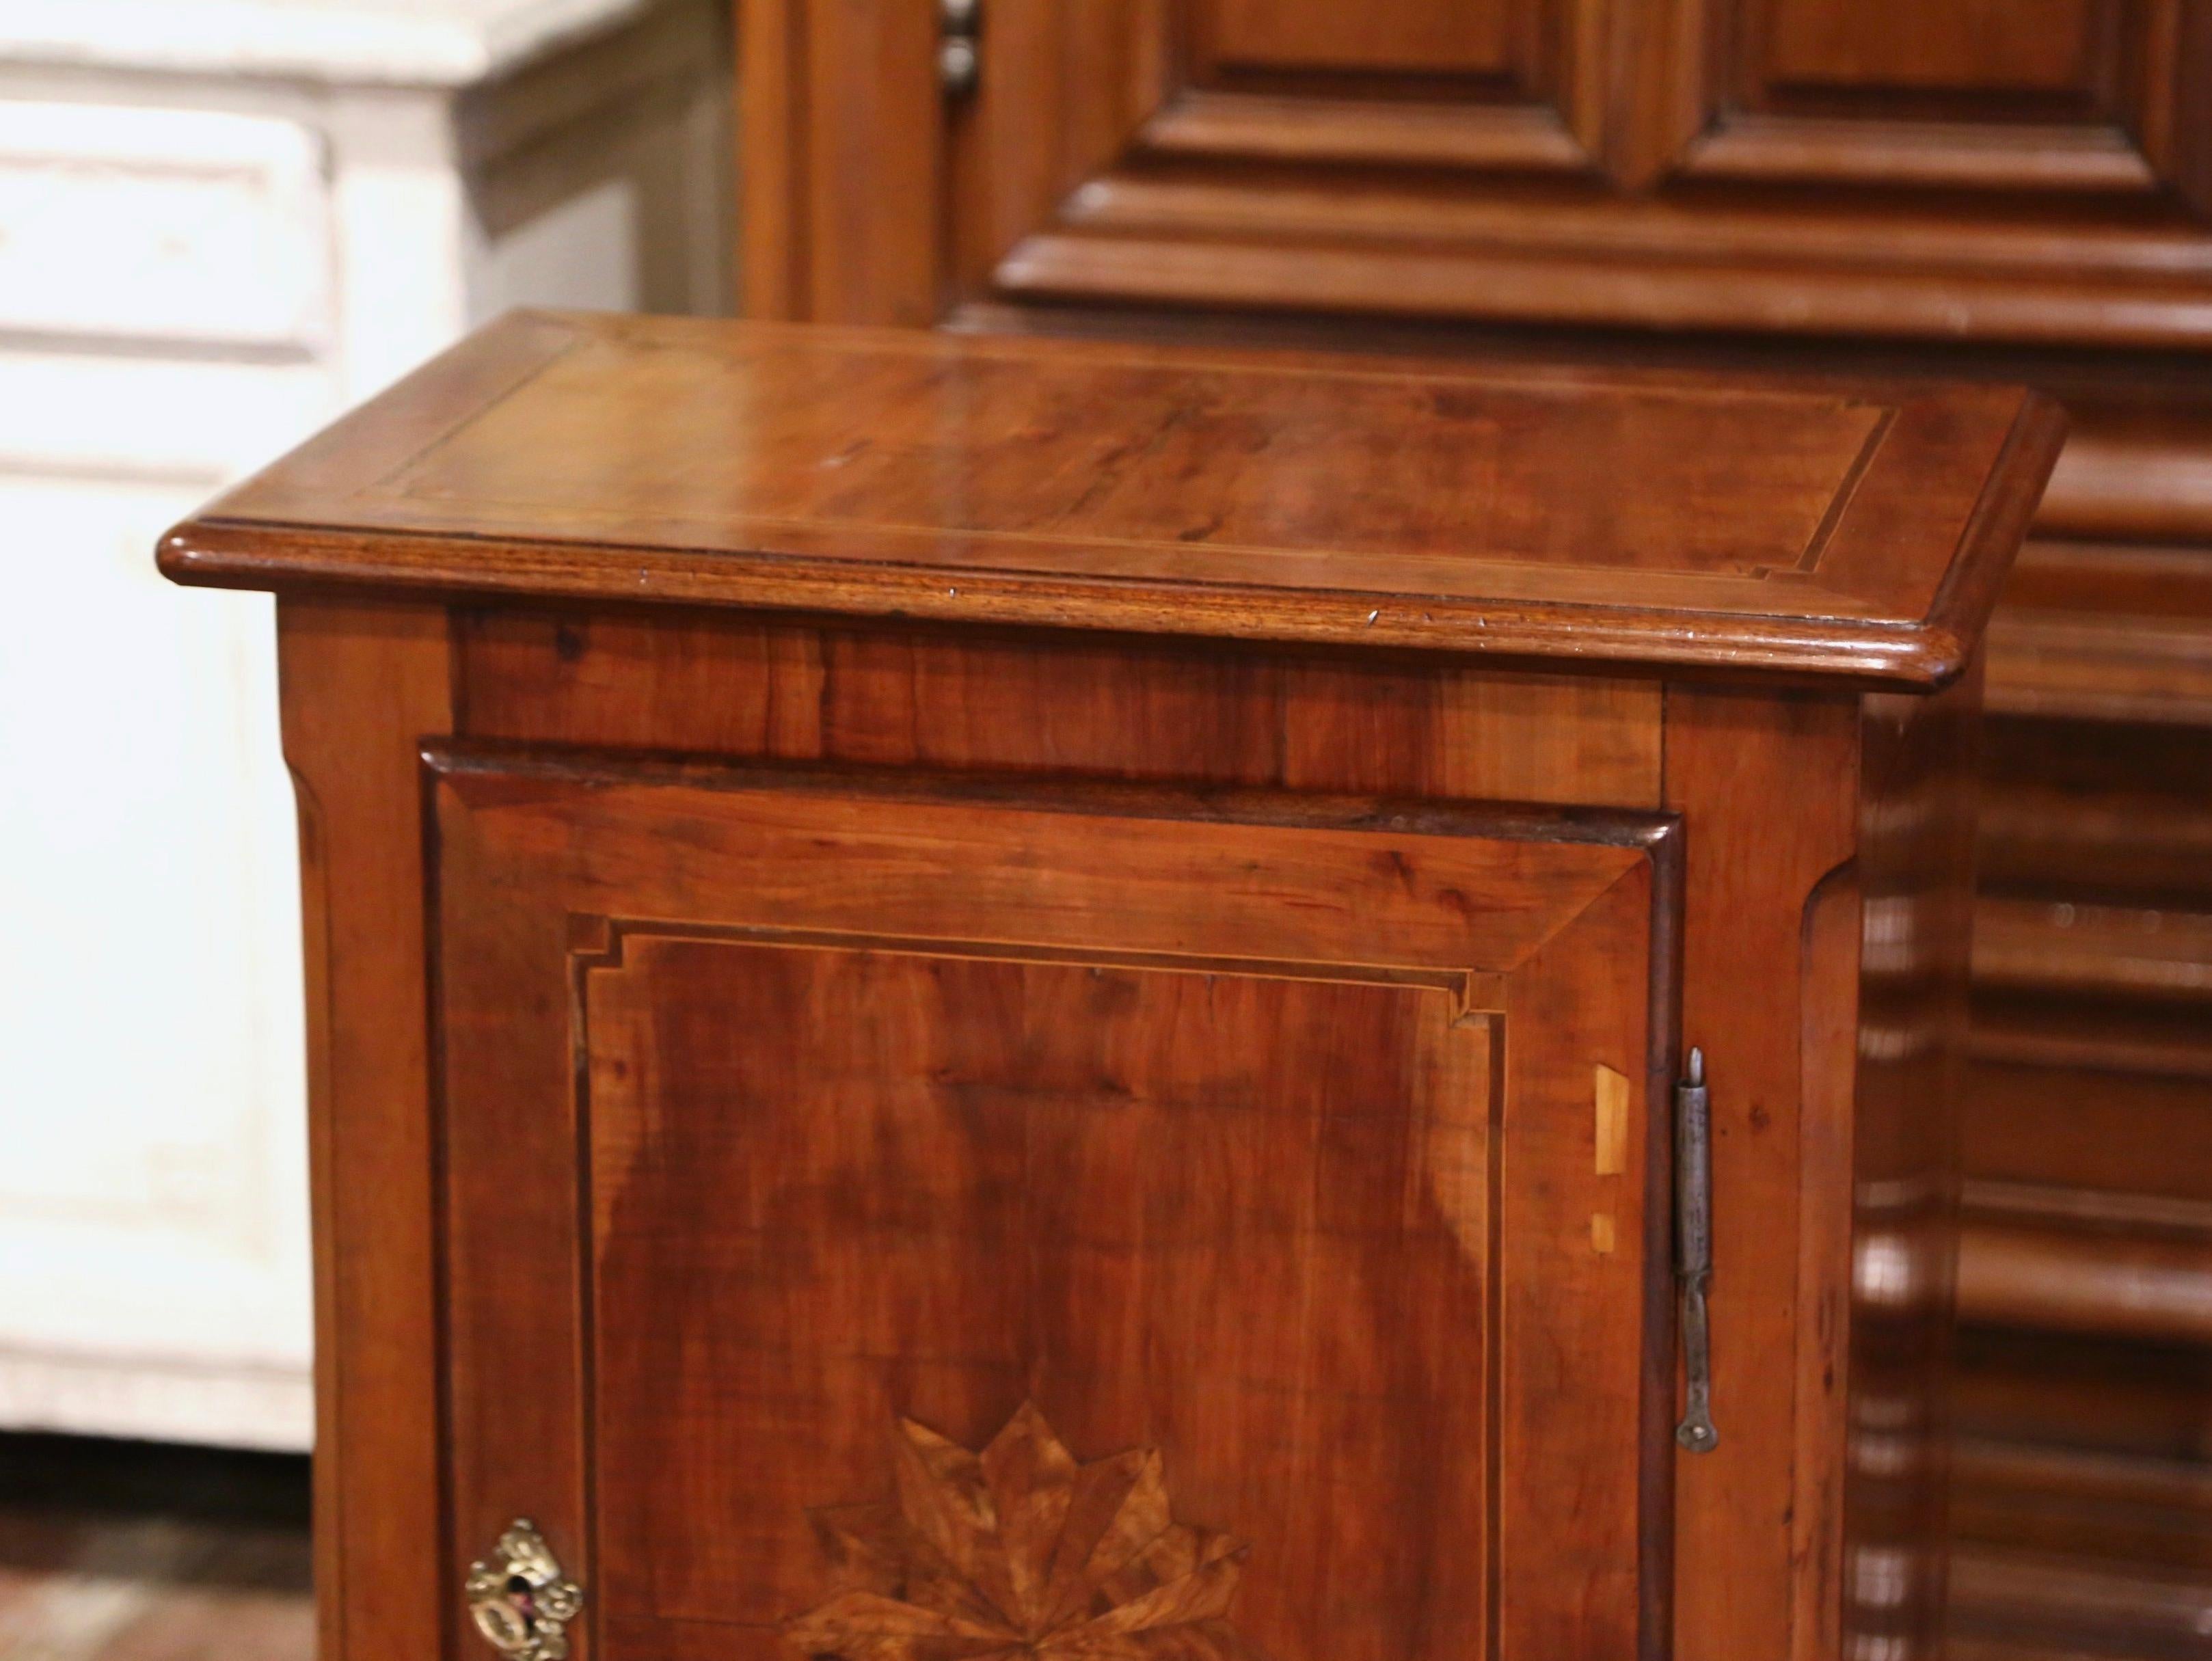 Patinated 19th Century French Louis XV Inlaid Walnut Confiturier Cabinet from Paris